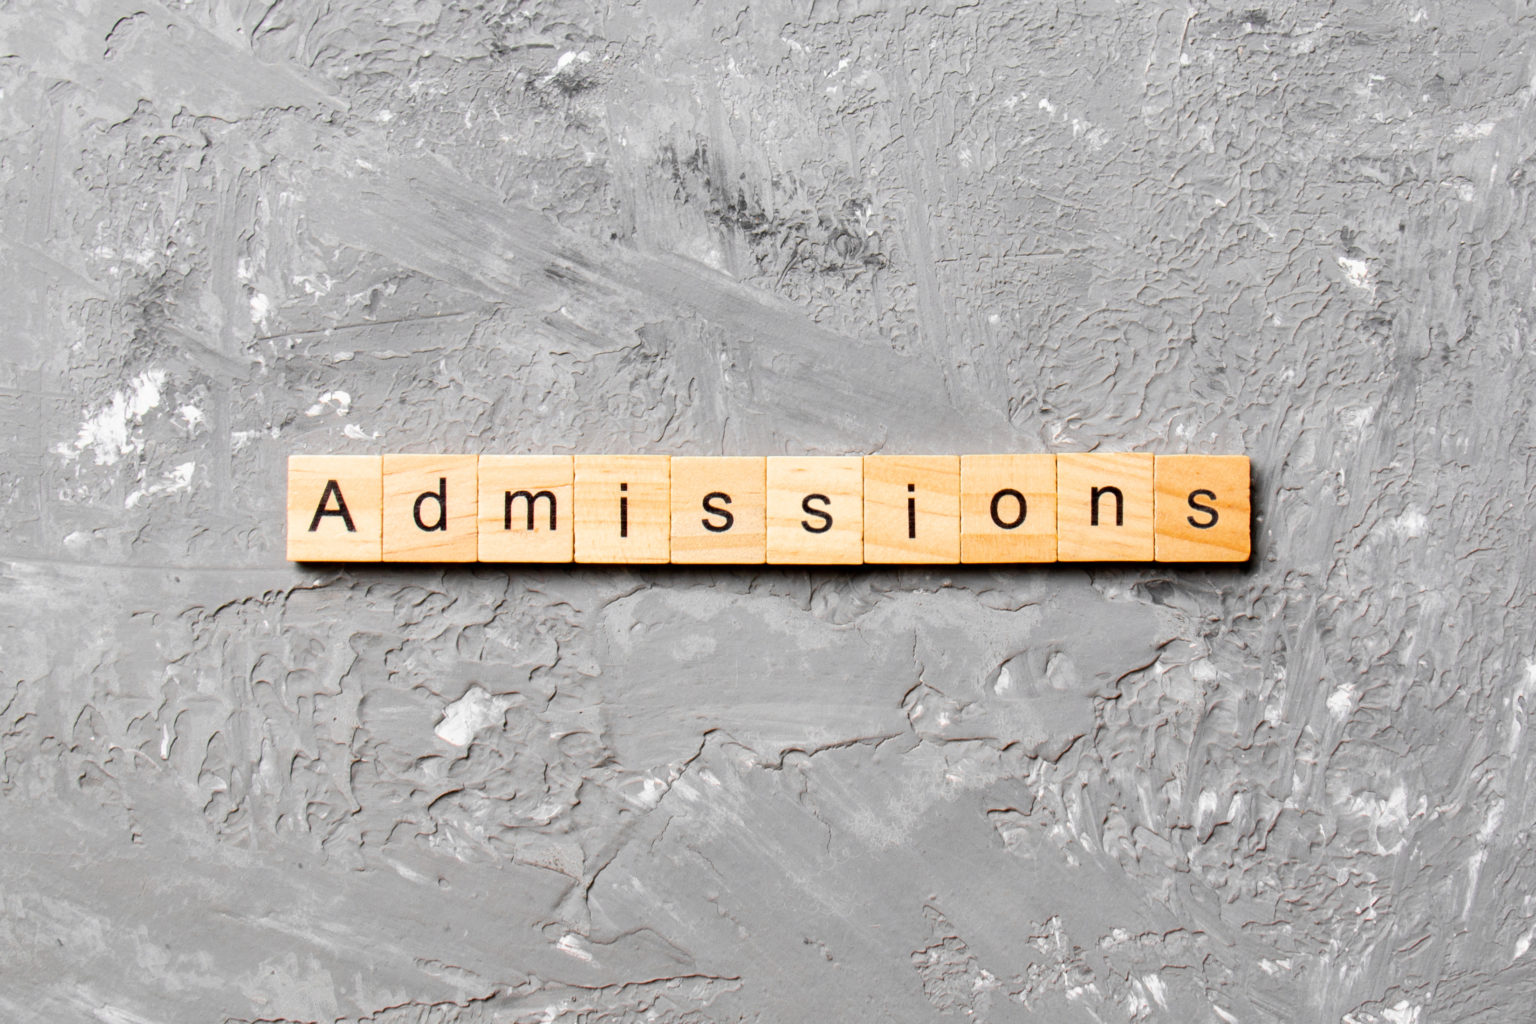 Five Key Roles for Private School Admissions